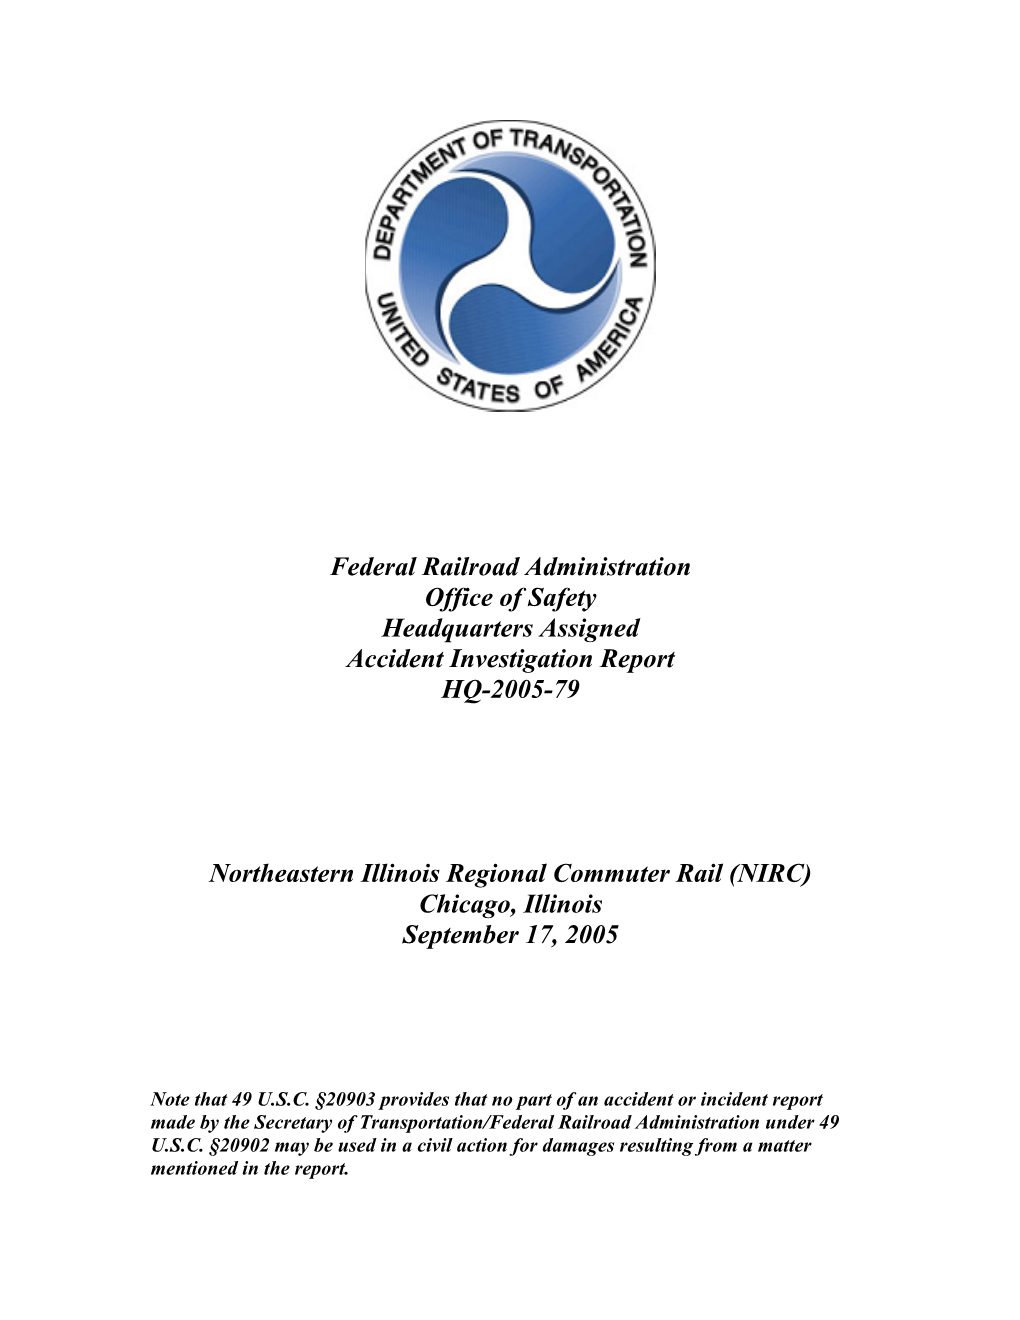 Federal Railroad Administration Office of Safety Headquarters Assigned Accident Investigation Report HQ-2005-79